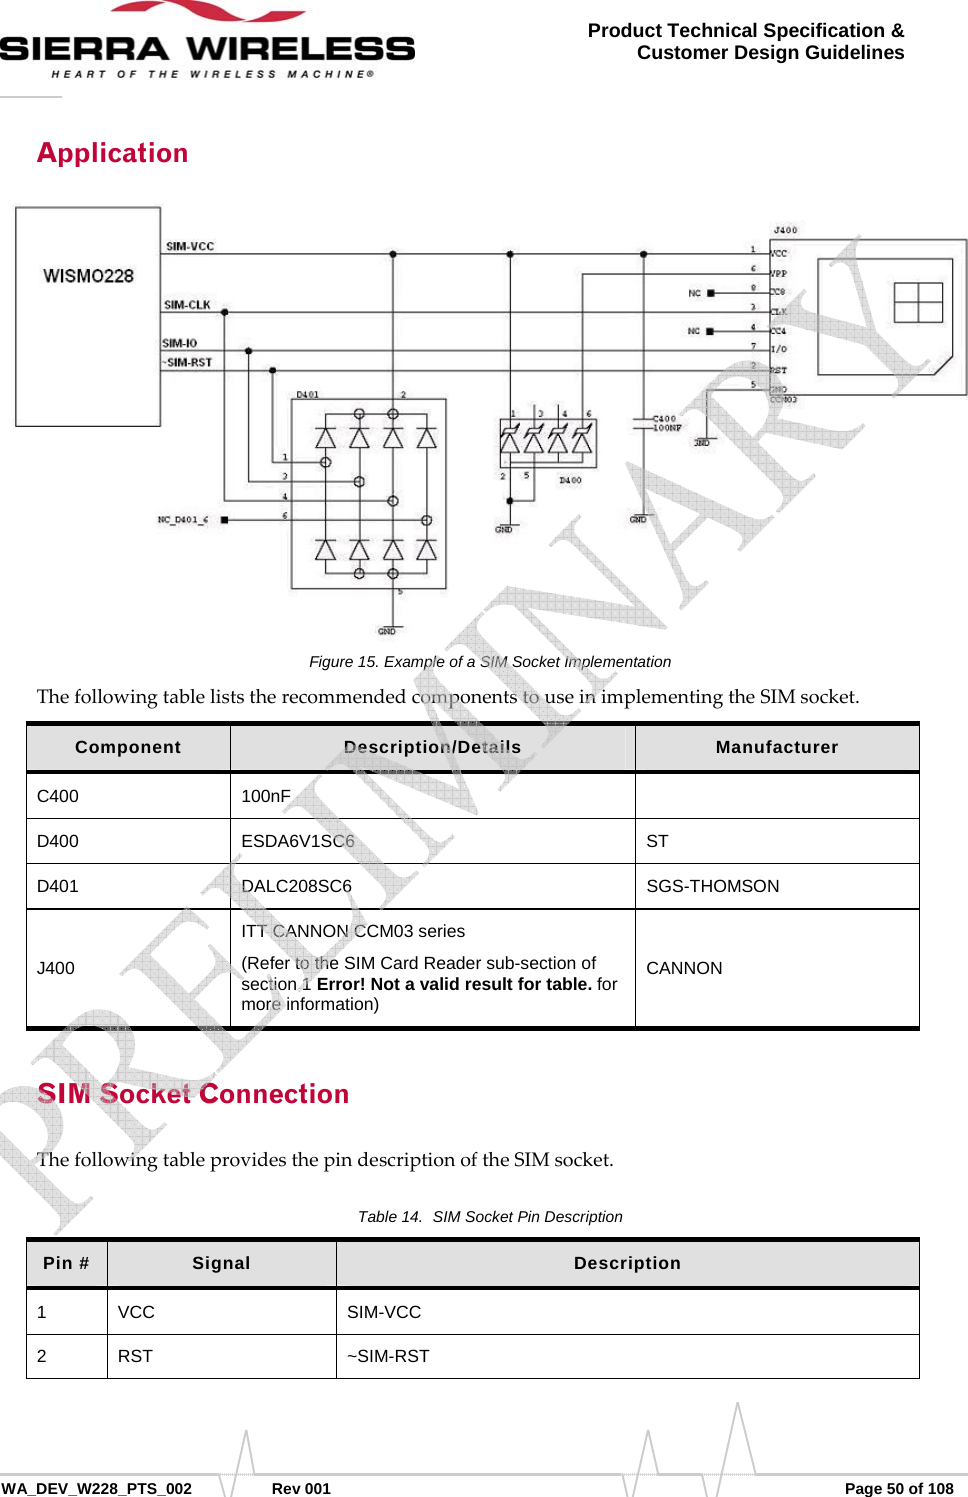      WA_DEV_W228_PTS_002 Rev 001  Page 50 of 108 Product Technical Specification &amp; Customer Design Guidelines Application Figure 15. Example of a SIM Socket Implementation ThefollowingtableliststherecommendedcomponentstouseinimplementingtheSIMsocket.Component  Description/Details  Manufacturer C400 100nF   D400 ESDA6V1SC6  ST D401 DALC208SC6  SGS-THOMSON J400 ITT CANNON CCM03 series (Refer to the SIM Card Reader sub-section of section 1 Error! Not a valid result for table. for more information) CANNON SIM Socket Connection ThefollowingtableprovidesthepindescriptionoftheSIMsocket.Table 14.  SIM Socket Pin Description Pin #  Signal  Description 1 VCC  SIM-VCC 2 RST  ~SIM-RST    